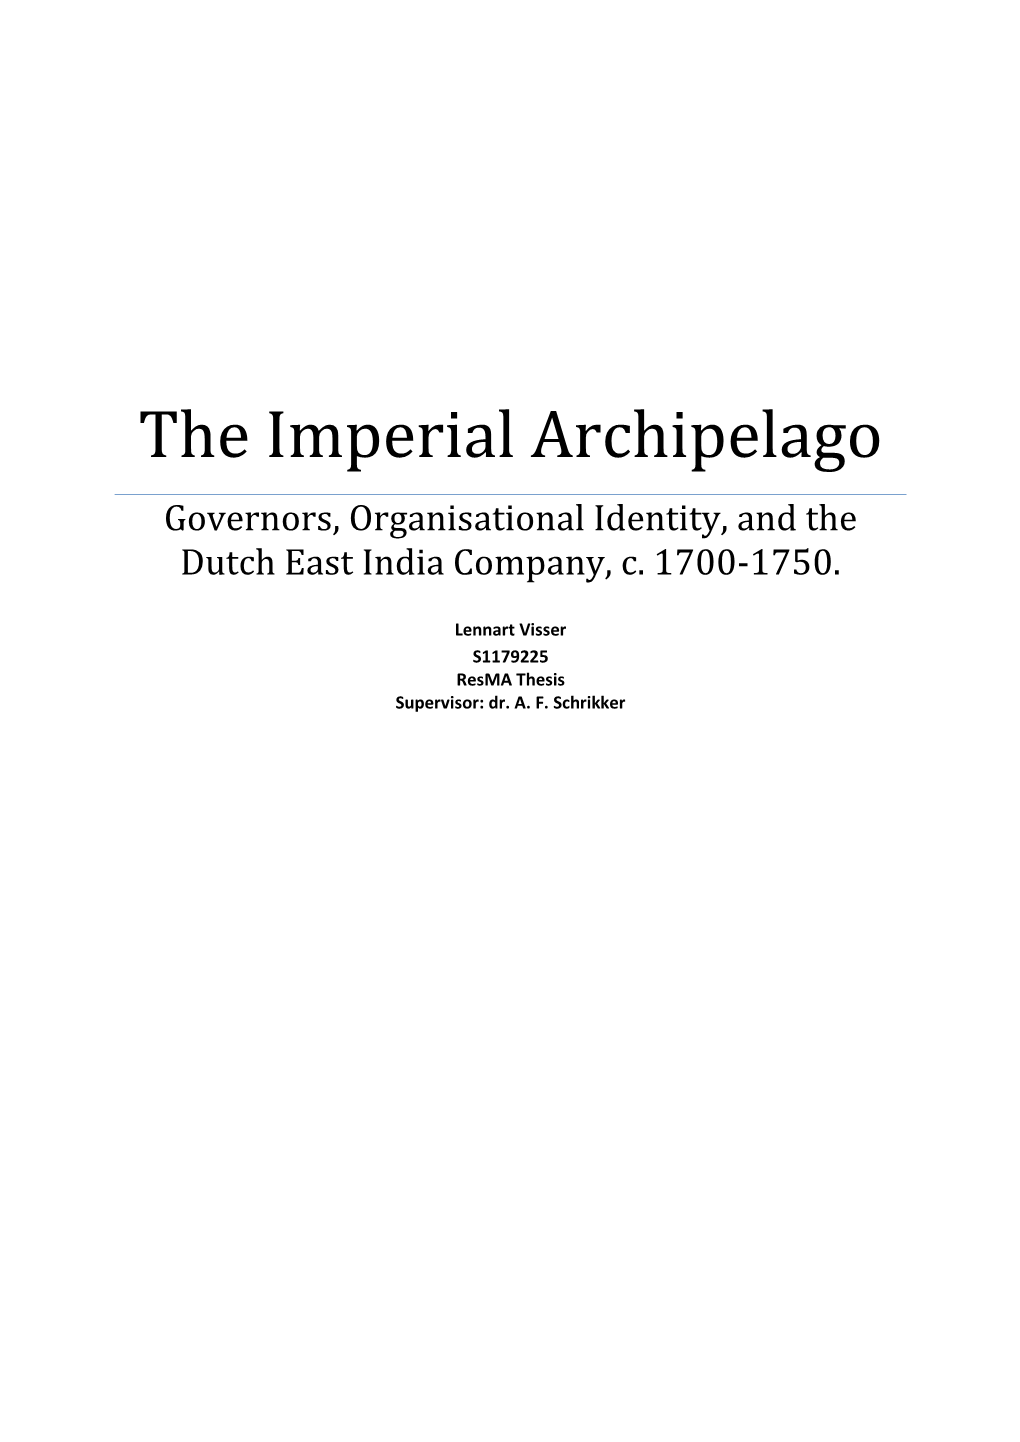 The Imperial Archipelago Governors, Organisational Identity, and the Dutch East India Company, C